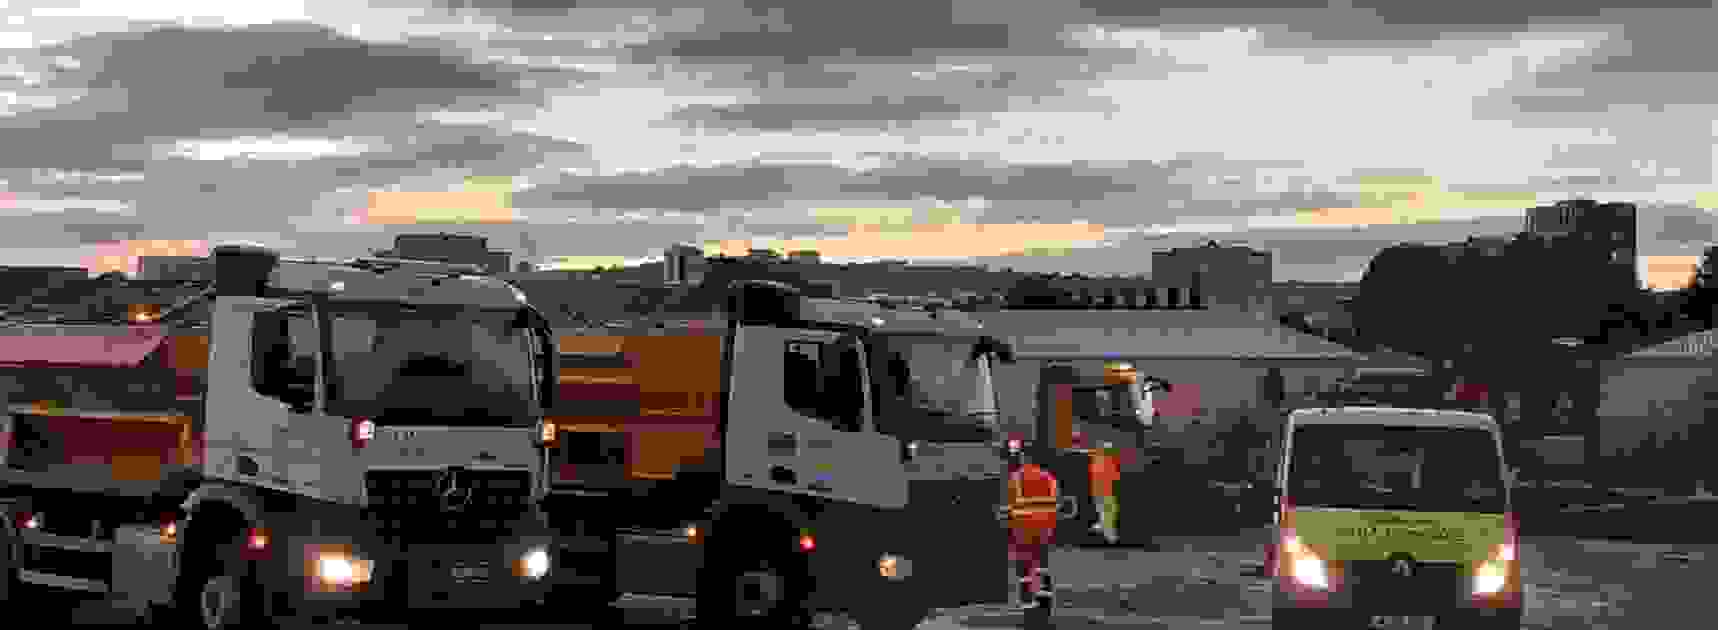 Two gritter lorries at dusk at works depot with pink and blue dusk sky